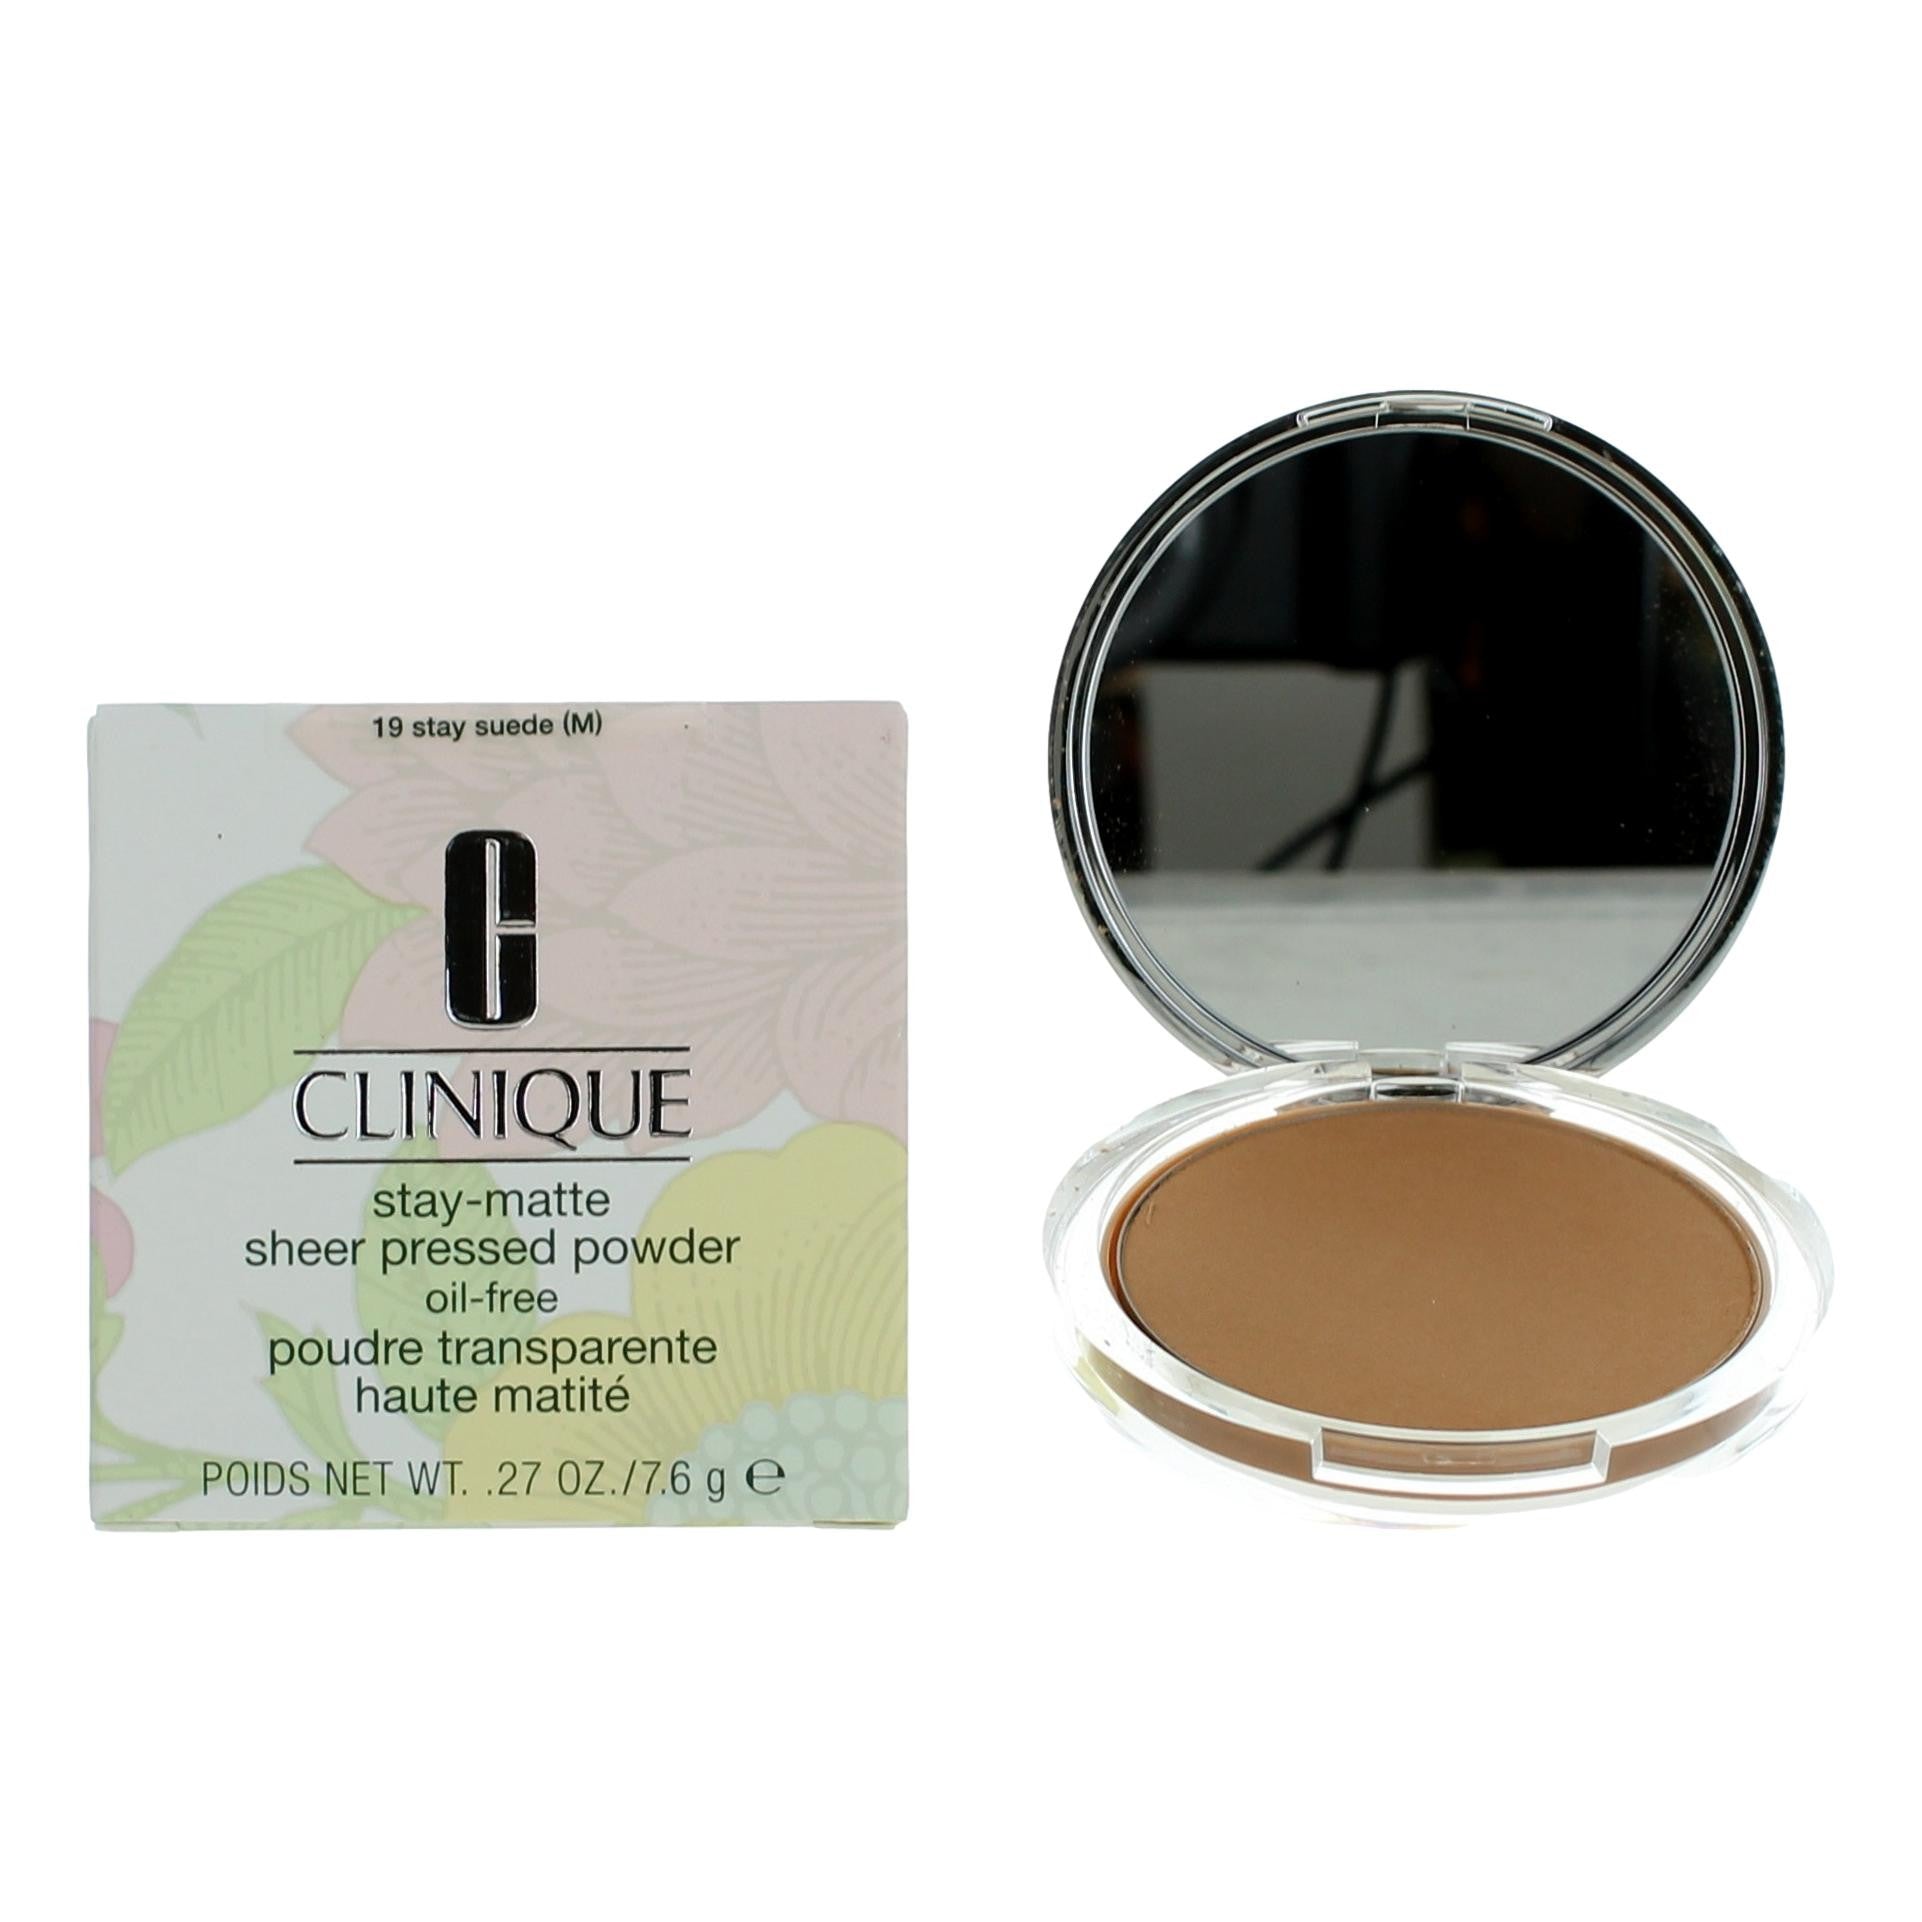 Clinique Stay-Matte by Clinique, .27oz Sheer Pressed Powder - 19 Stay Suede - 19 Stay Suede